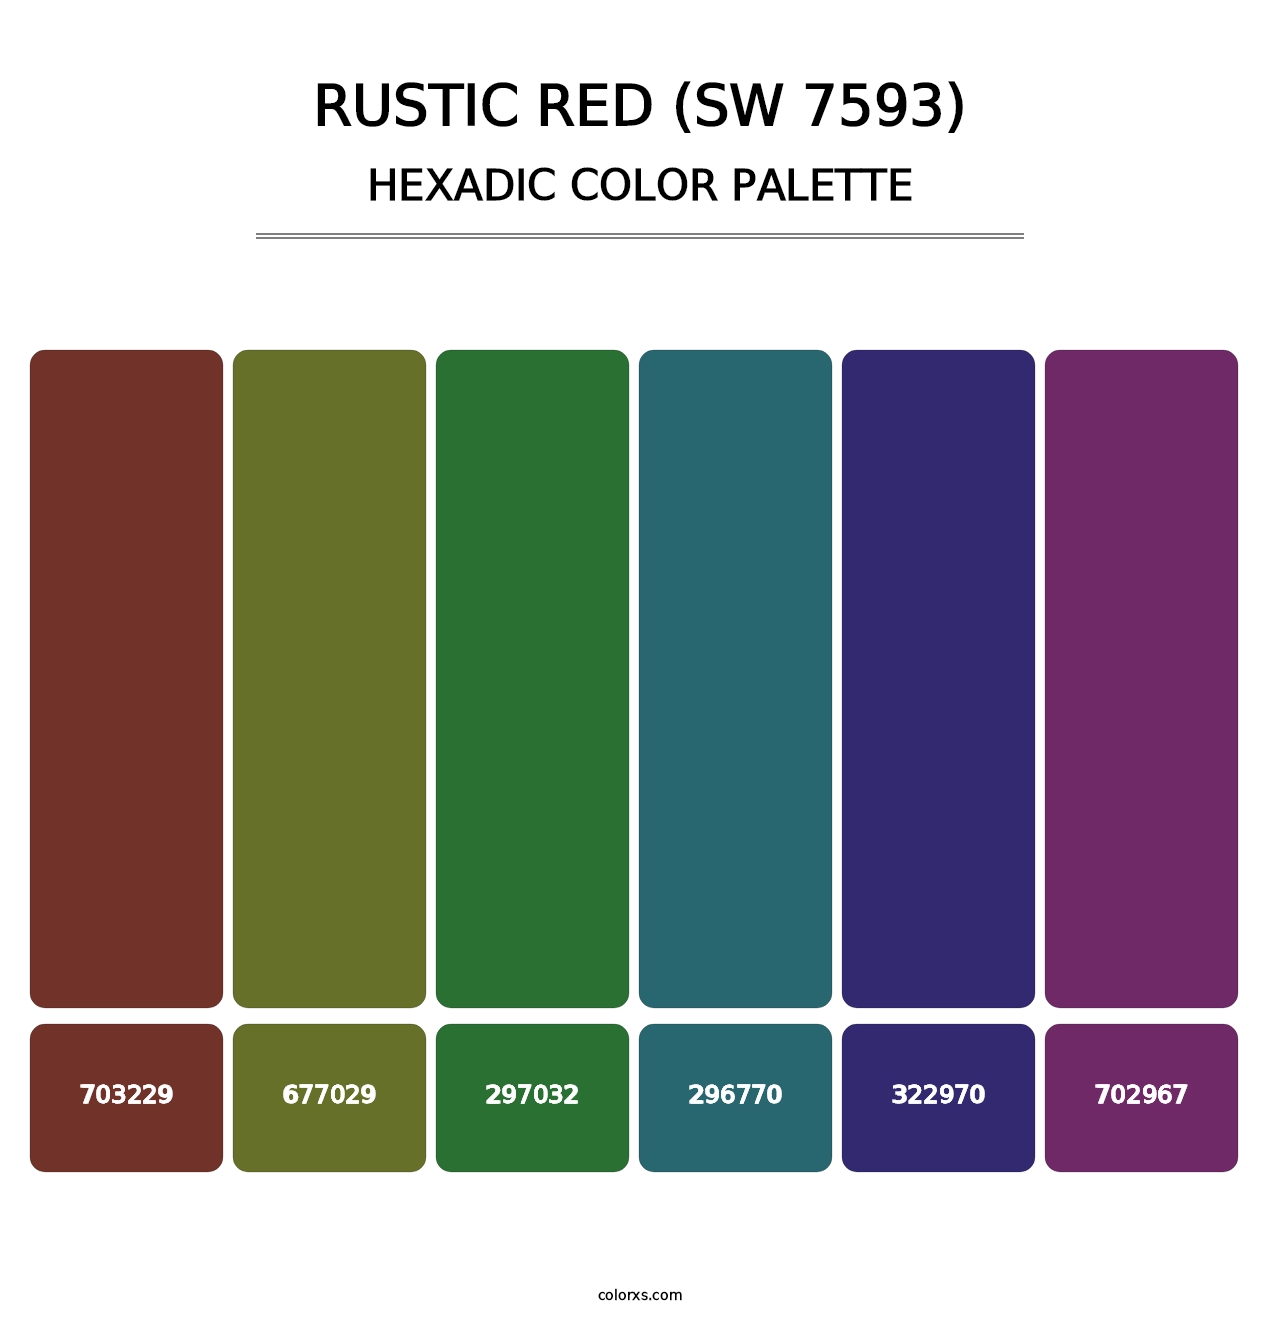 Rustic Red (SW 7593) - Hexadic Color Palette